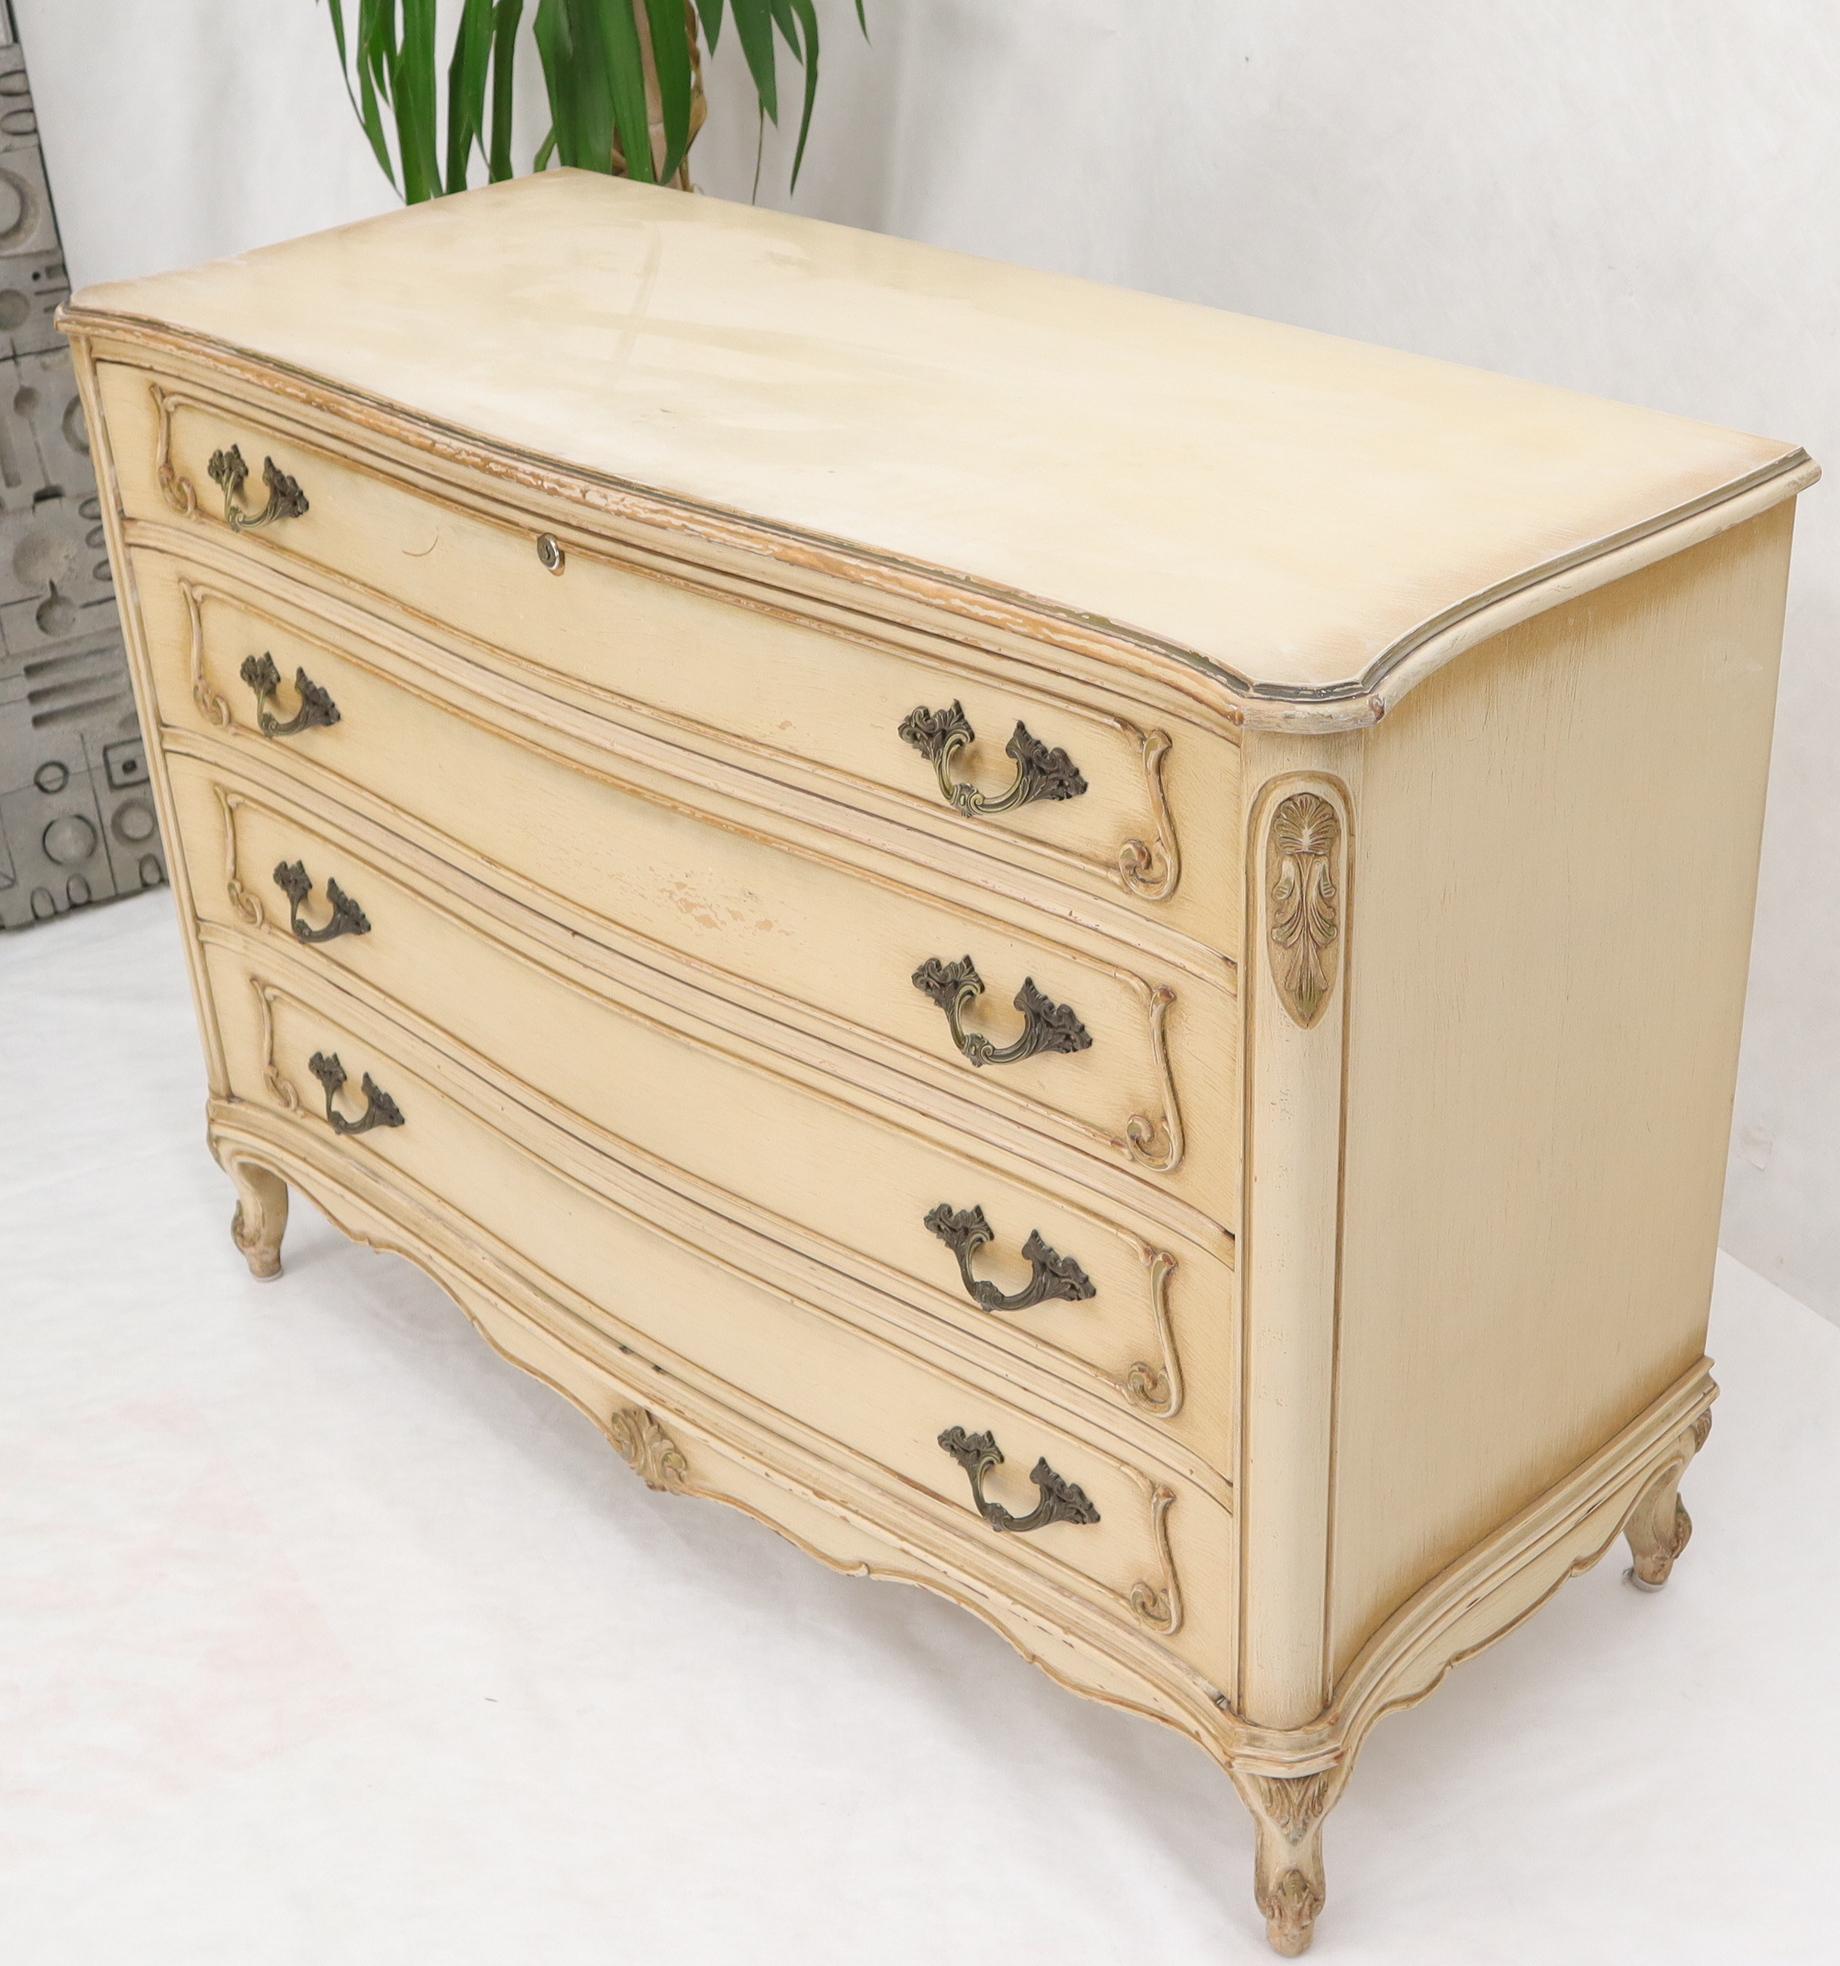 French provincial gold and off white painted 4 drawers dresser.